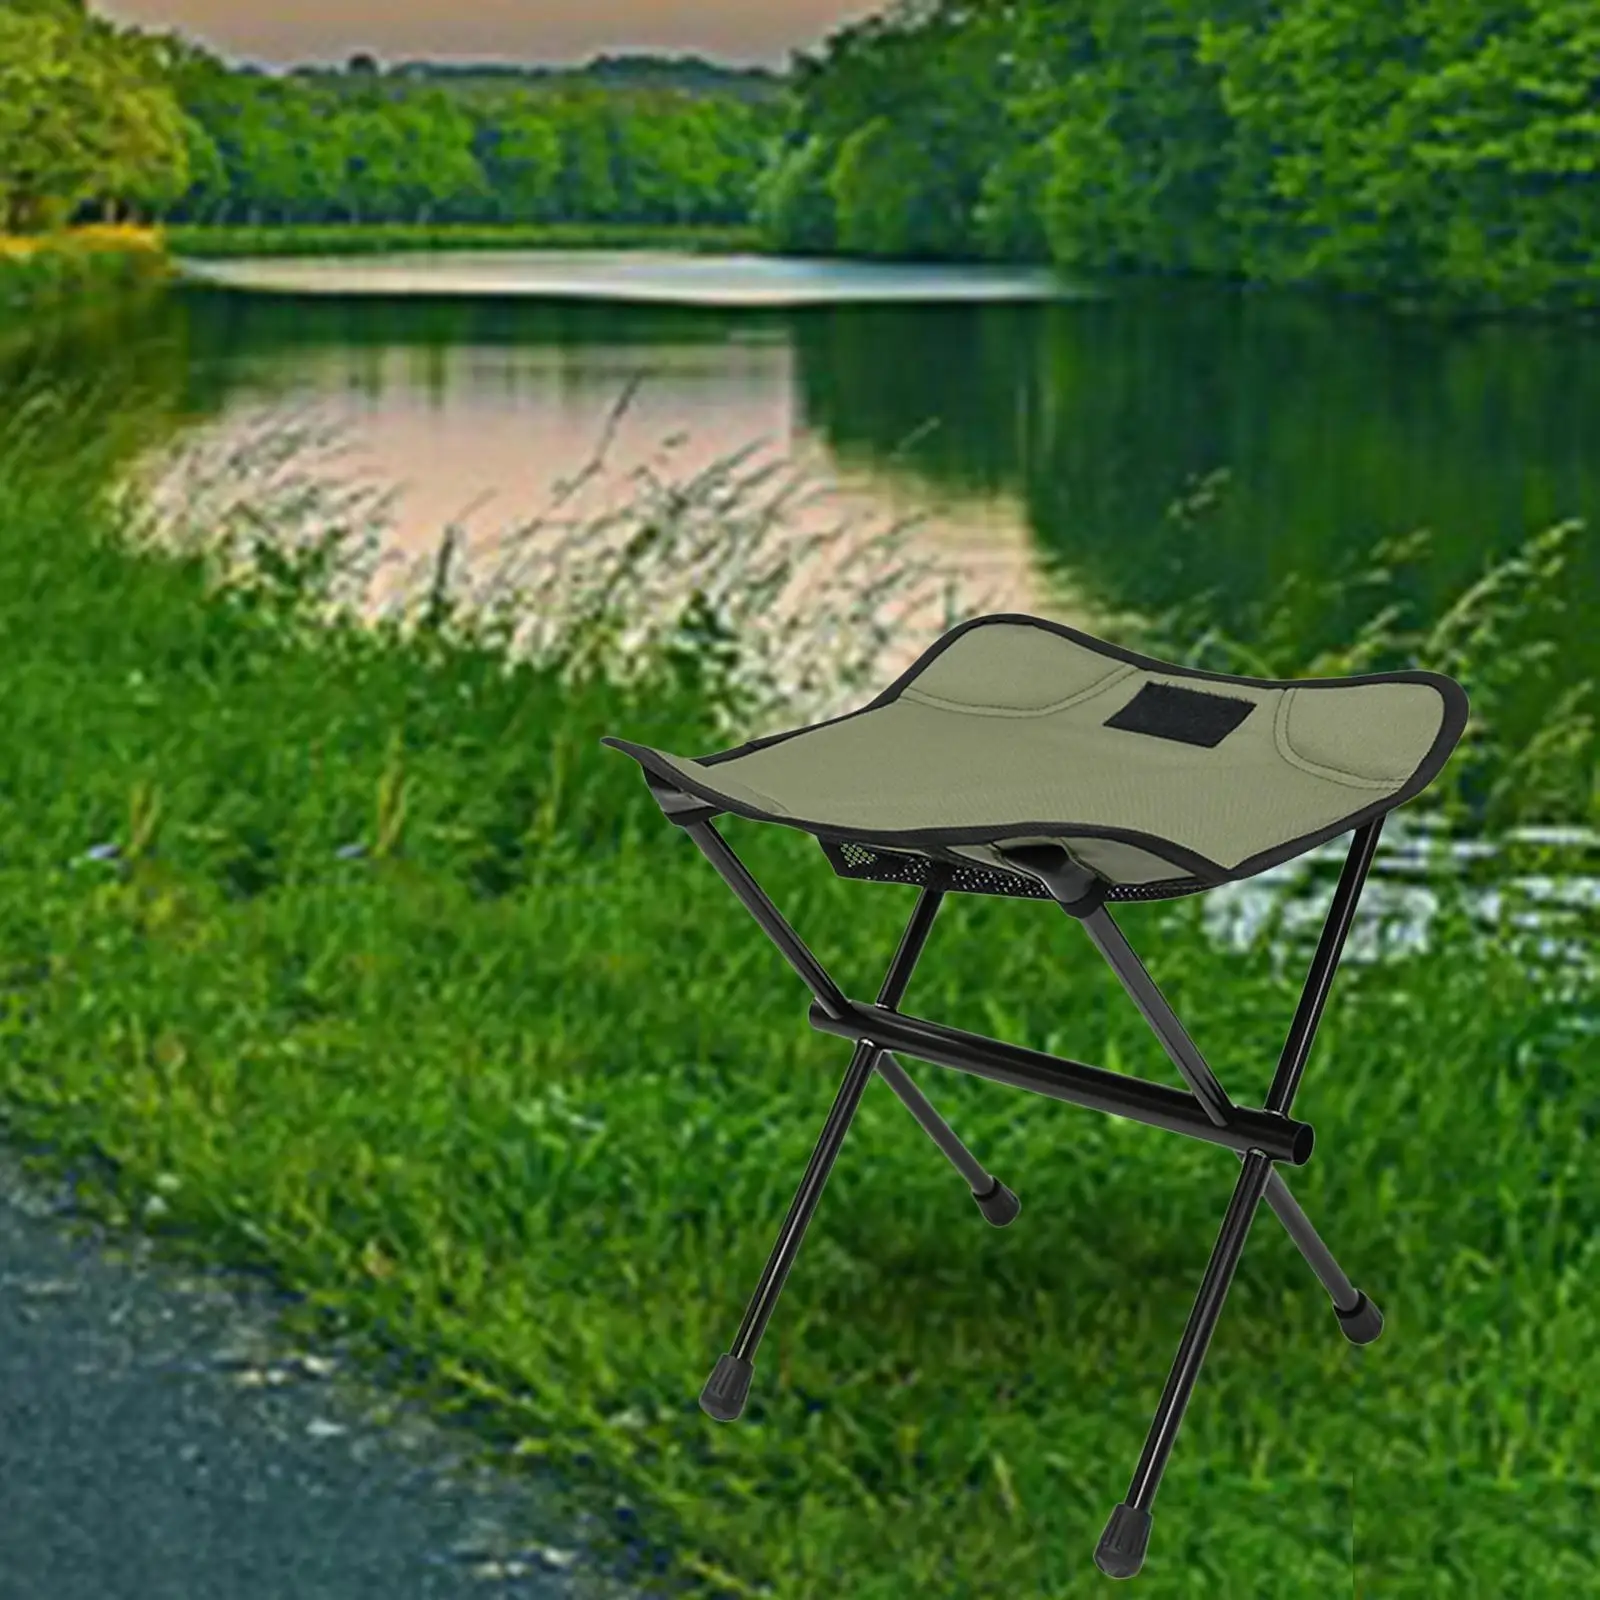 Camping Folding Stool Portable Footrest Saddle Chair for Picnic Fishing BBQ